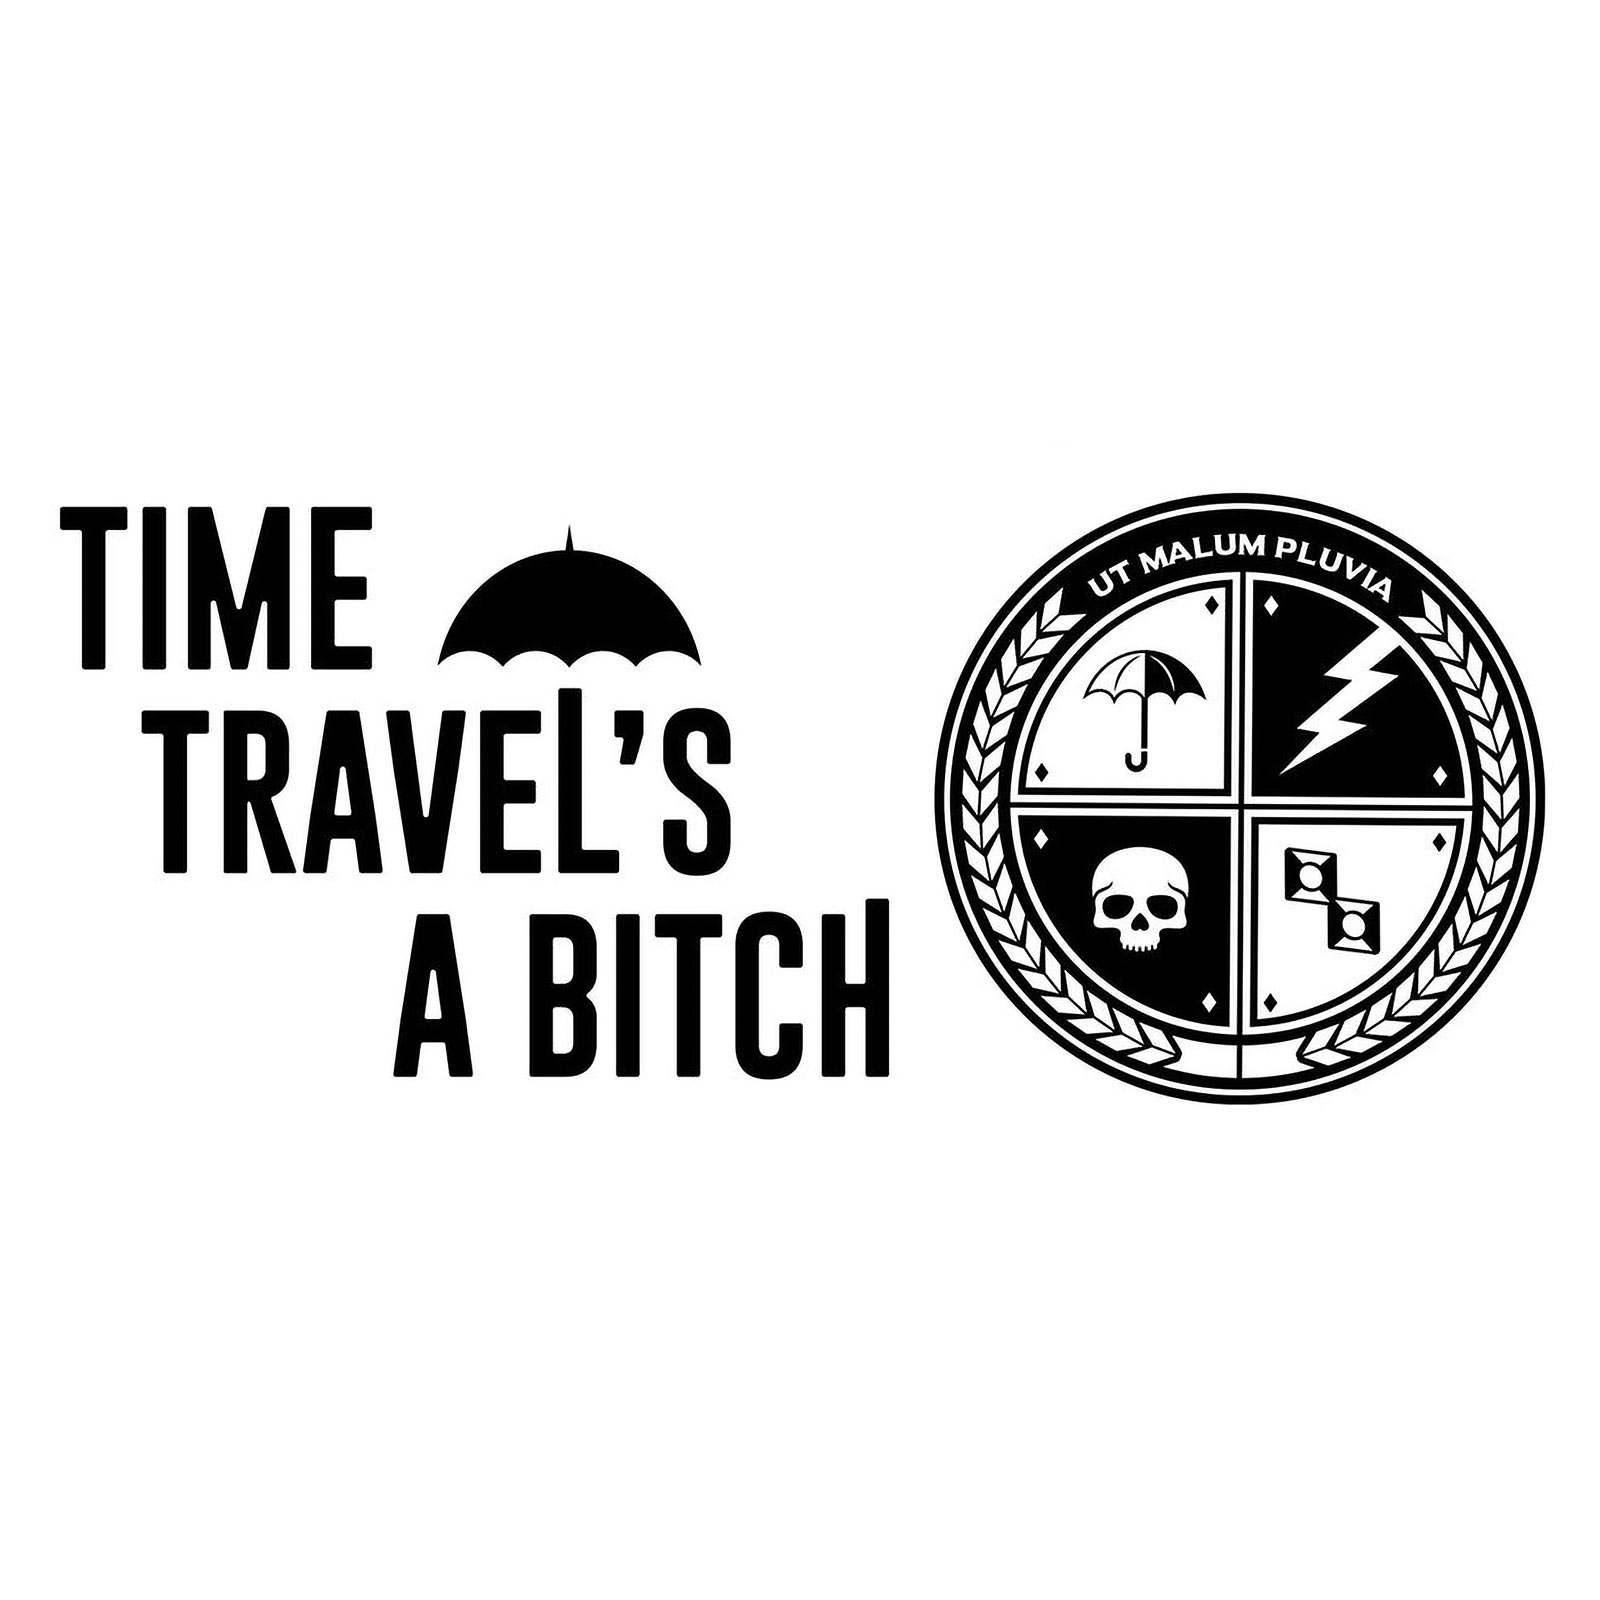 Time Travel's a Bitch mok voor The Umbrella Academy fans